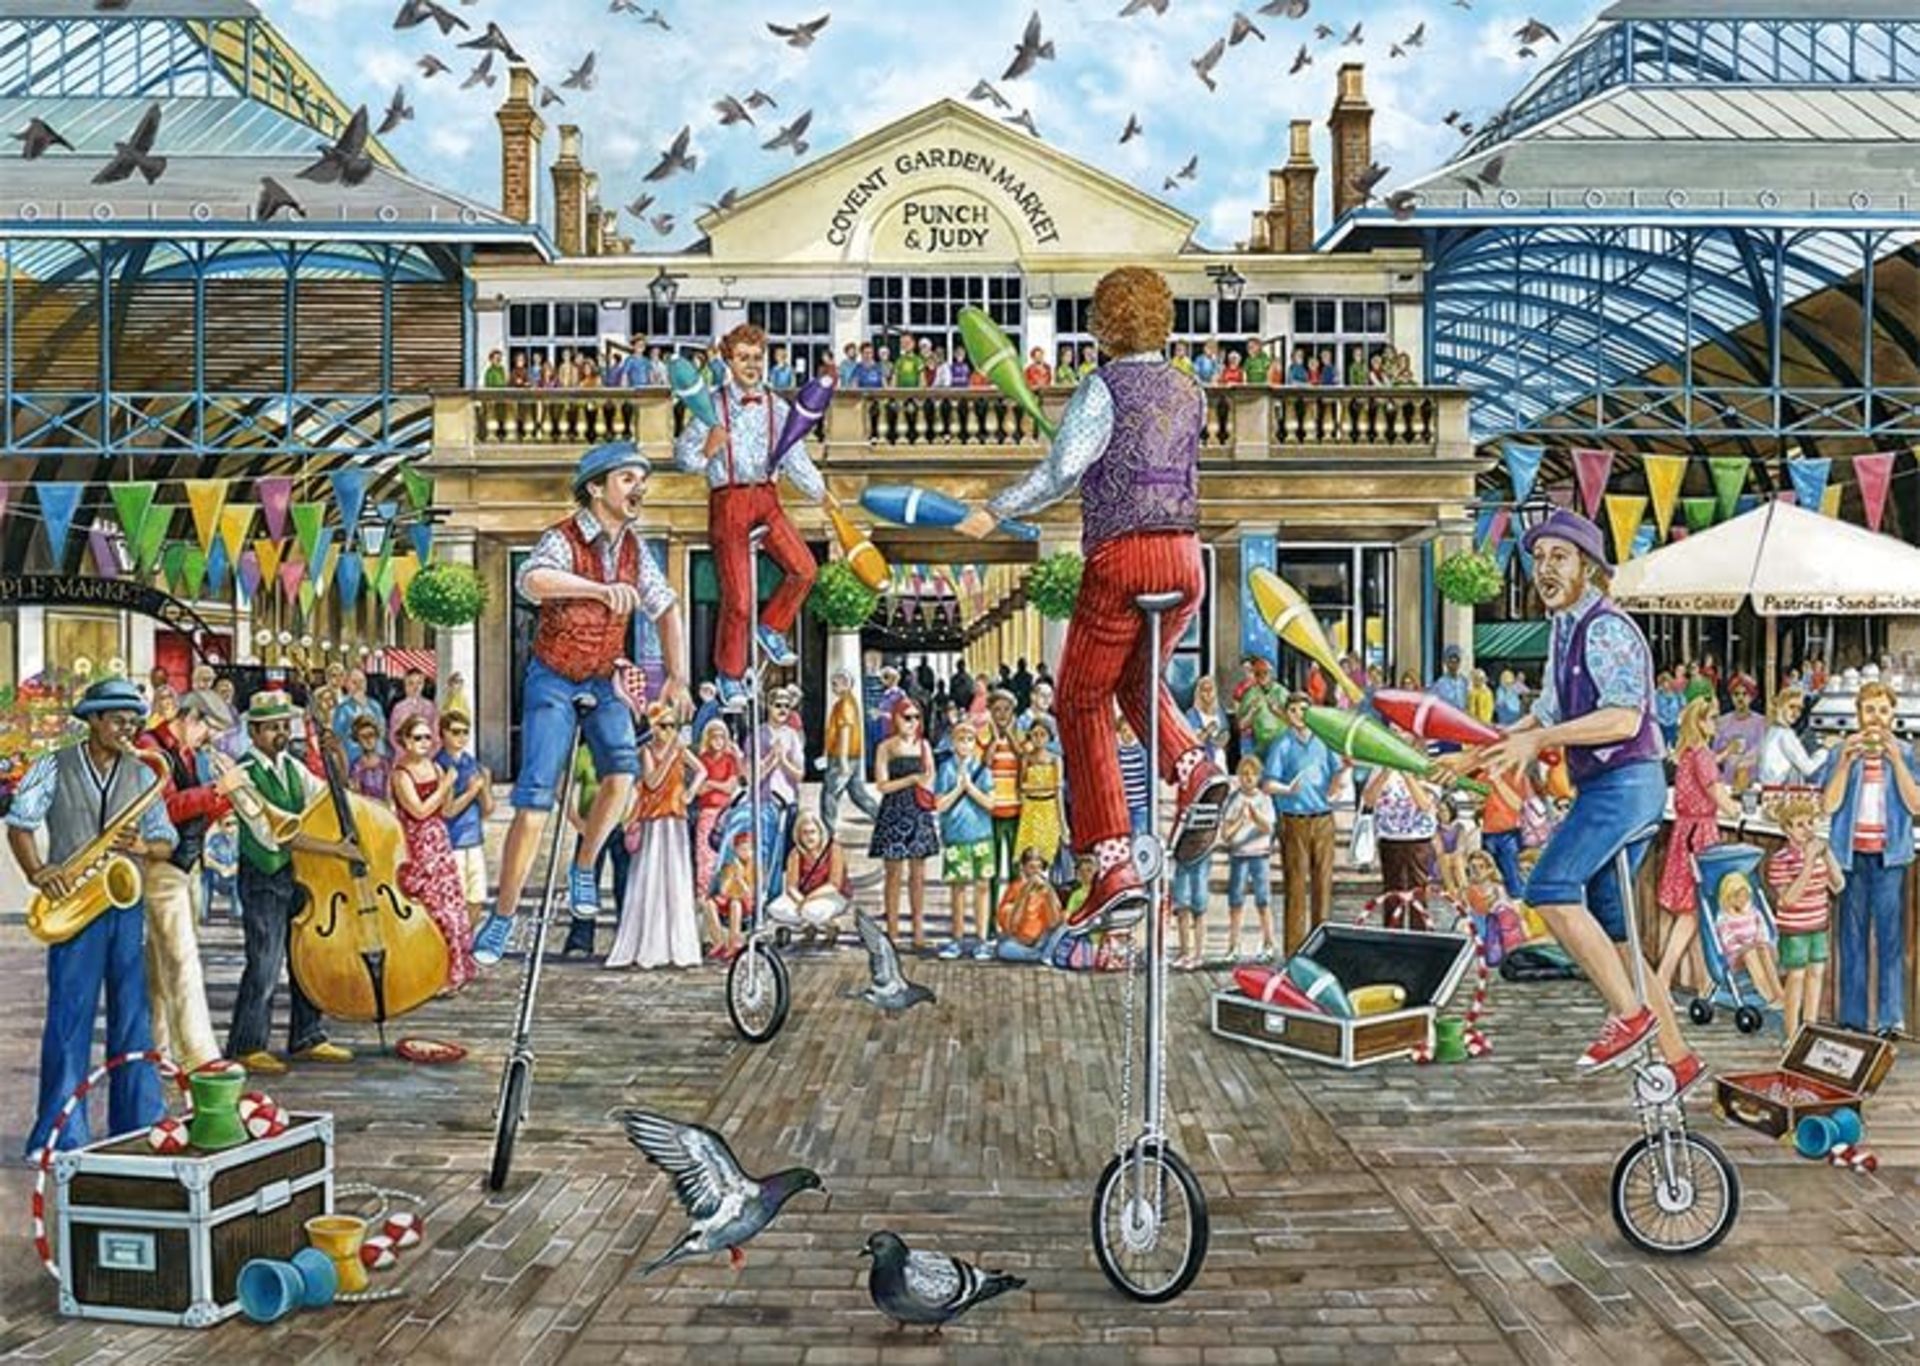 25 X NEW COVENT GARDEN 500PC JIGSAW - Image 4 of 5